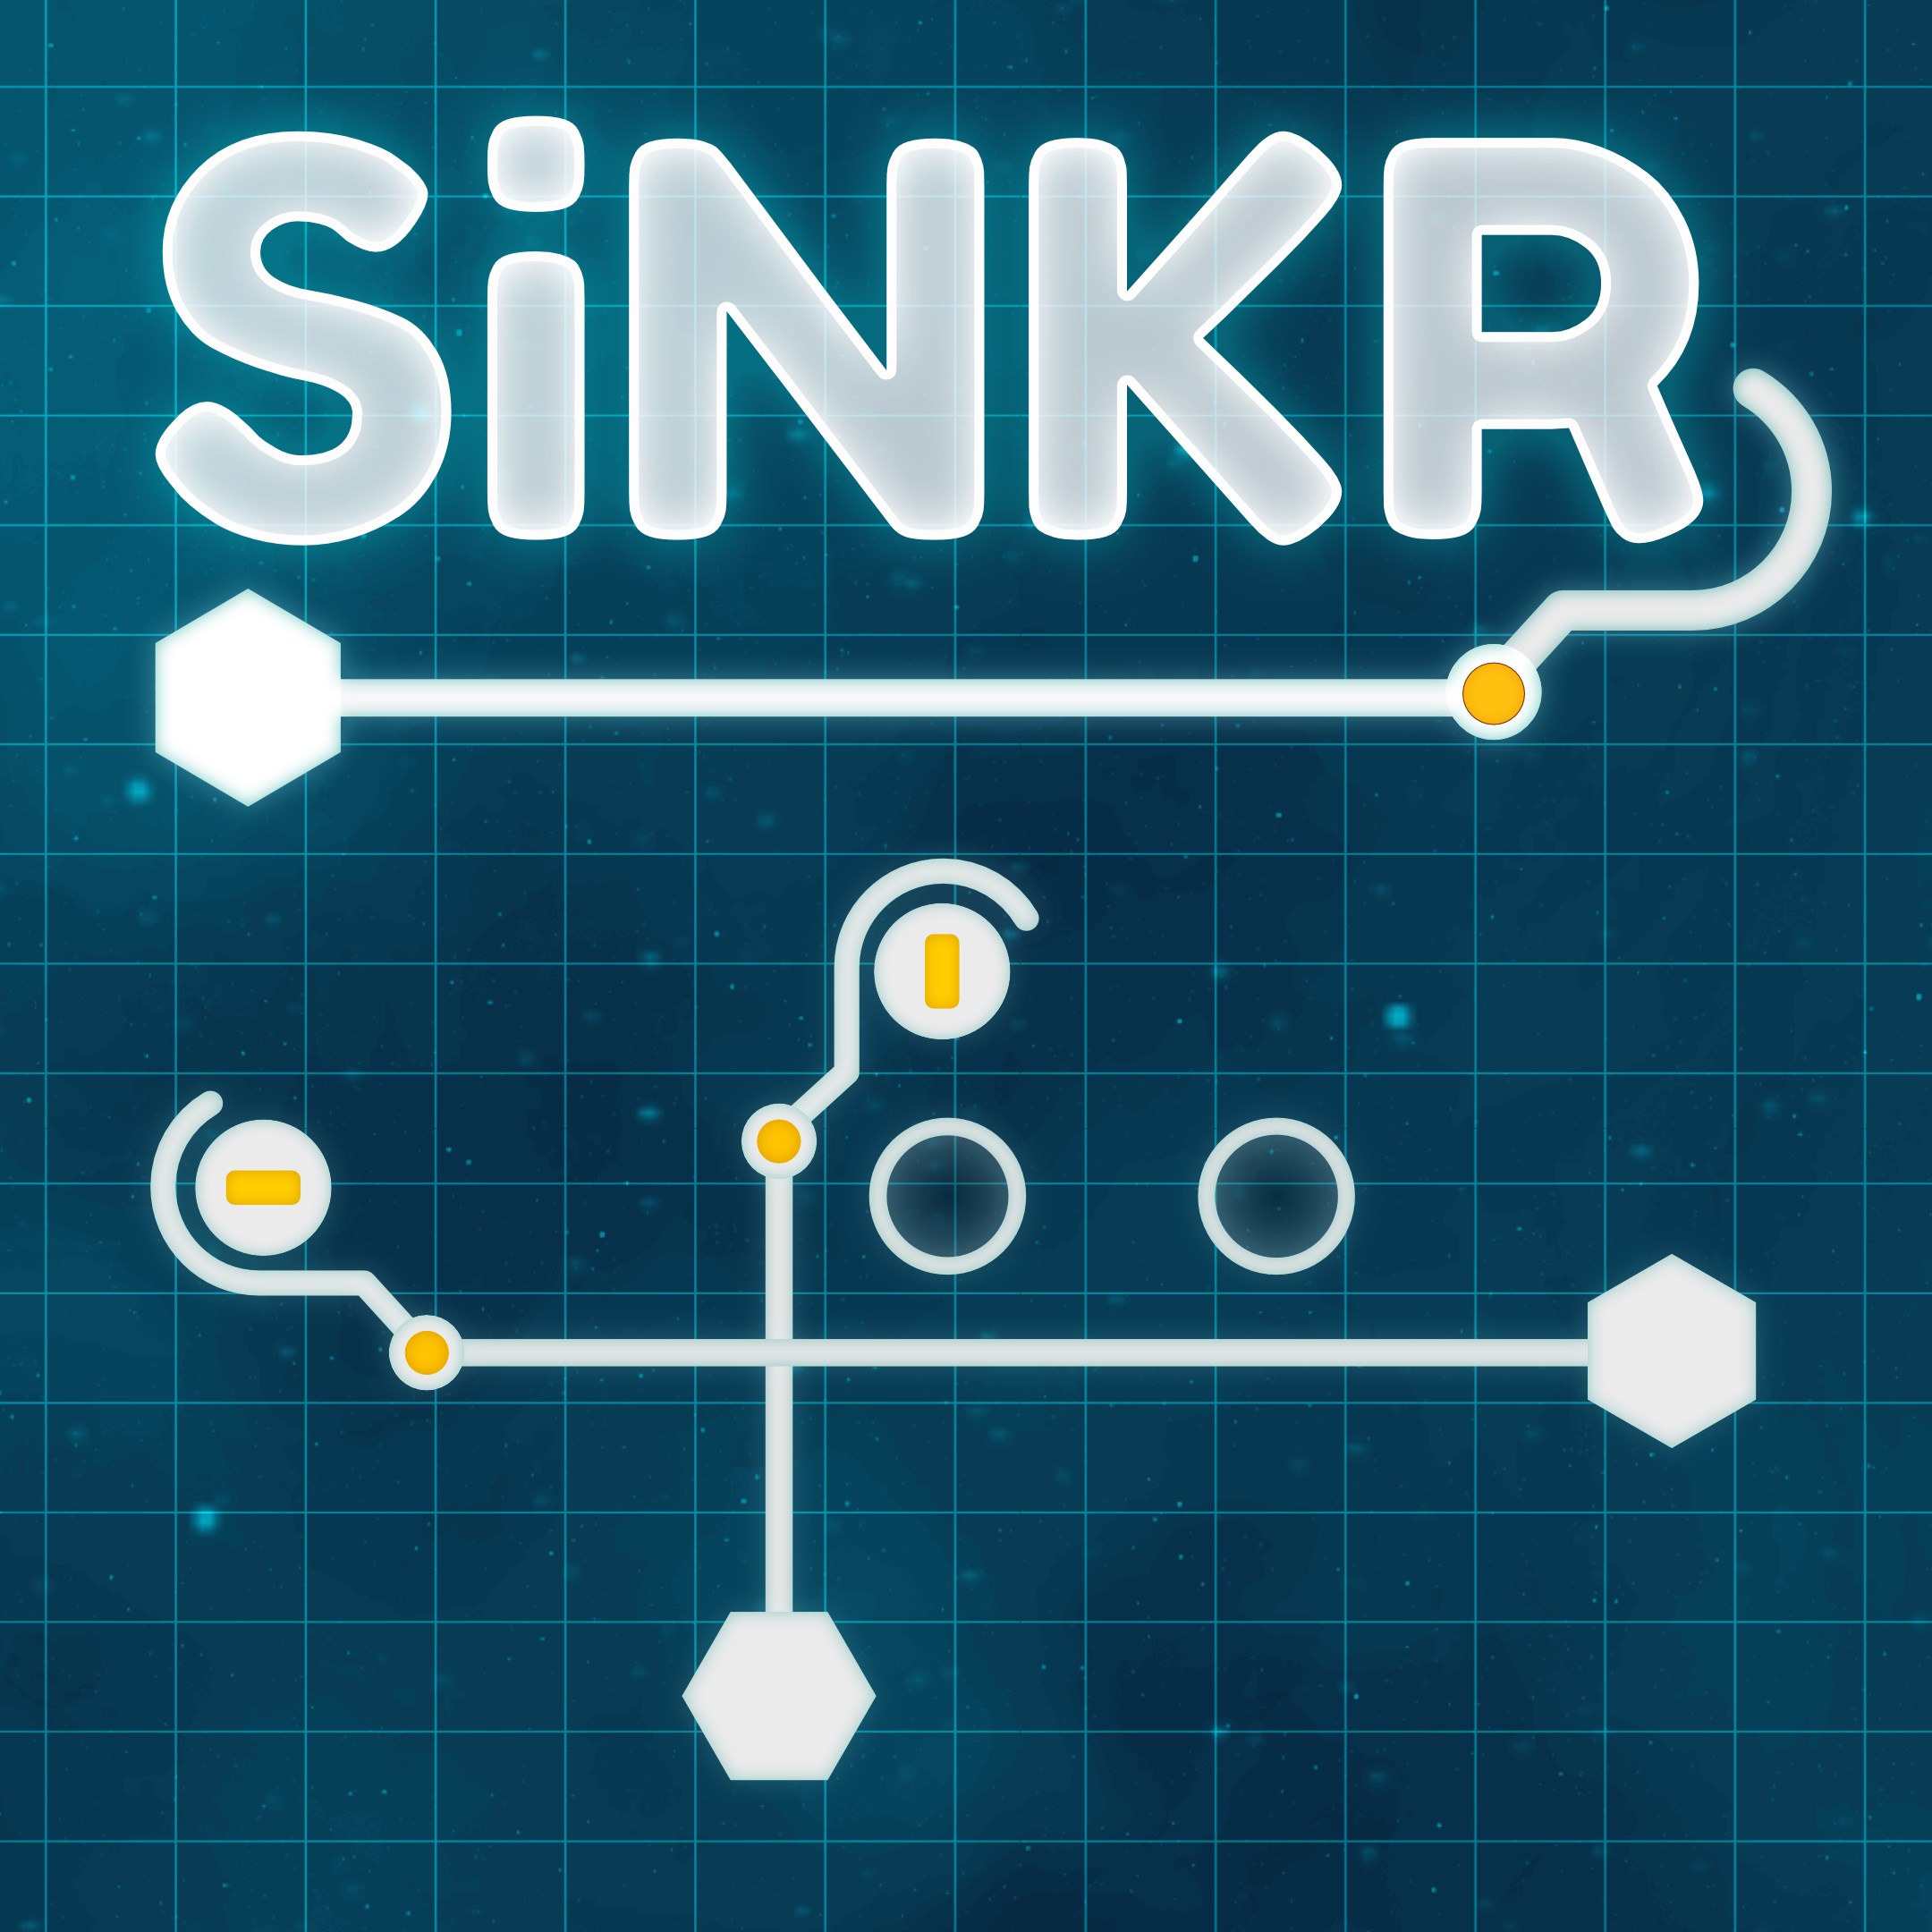 SiNKR technical specifications for laptop